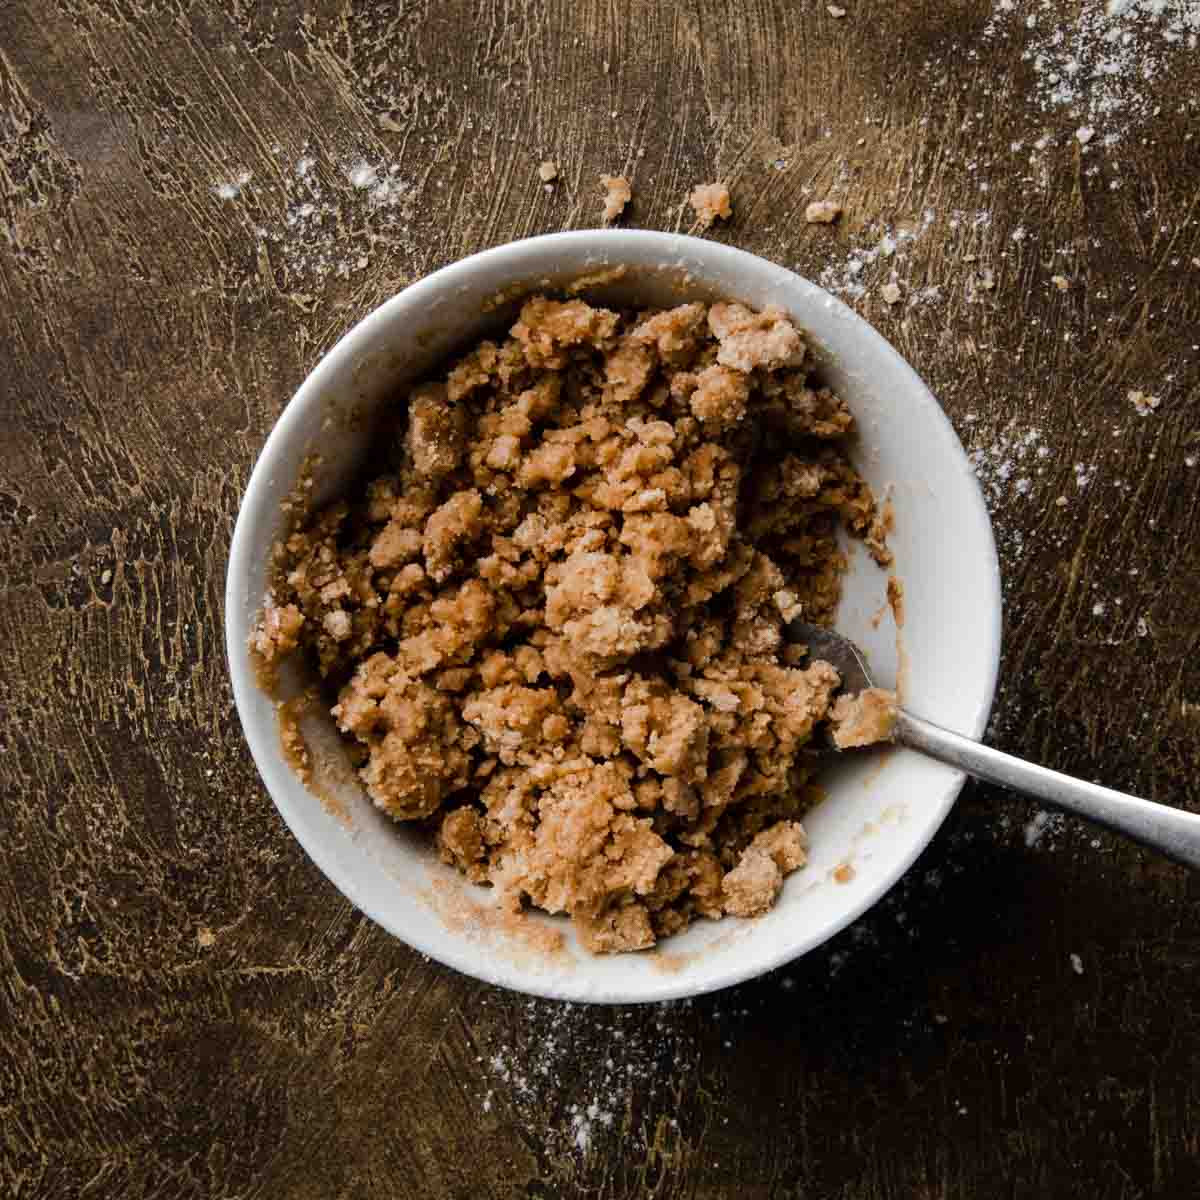 Cinnamon streusel crumble mixed together in a bowl